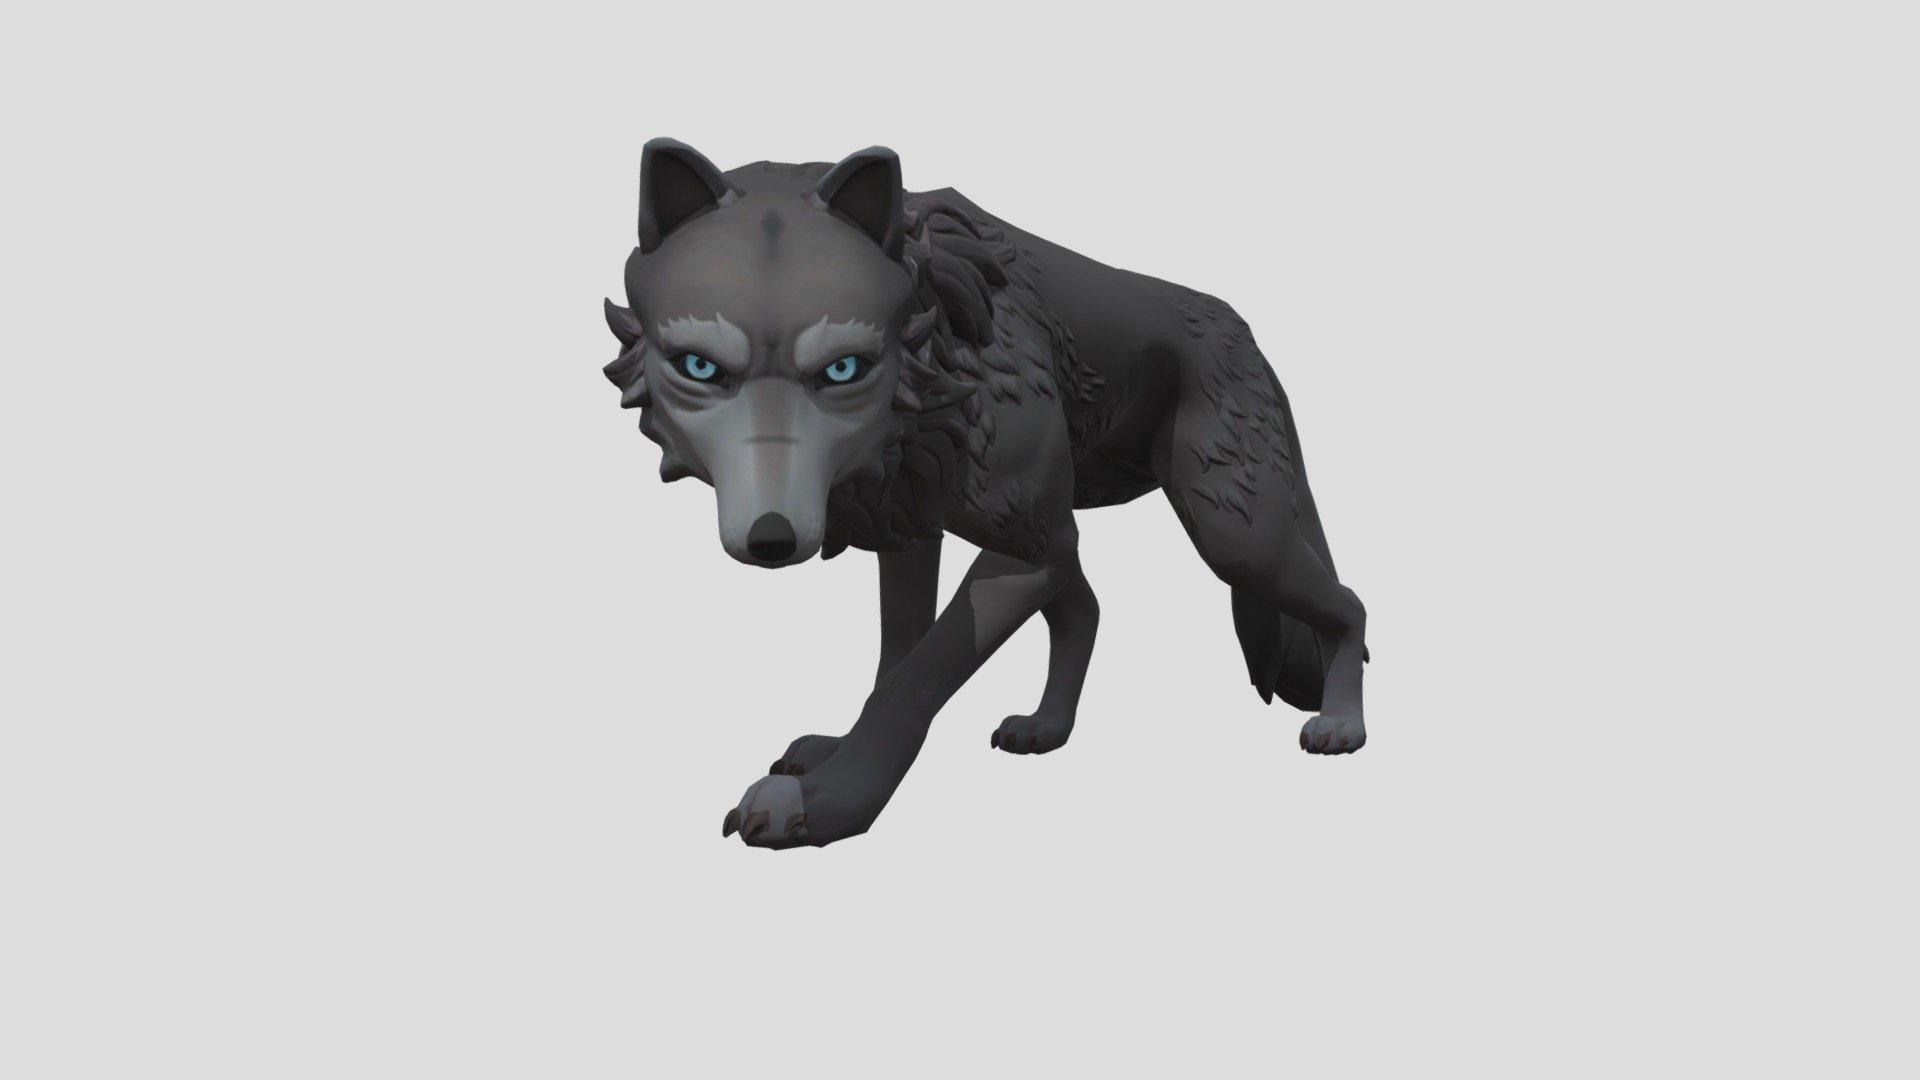 High quality game asset

Rigged, animated, textured and game ready wolf creature ready to be used for your game project. 
Can be used as a placeholder for a wolf character or as a final asset

Textures included:
-Normal Map
-Base Color

Animations included with the fbx and the blend files are:
-Bite
-Death
-Eat
-Idle
-Angry Idle
-Jump Forward
-Jumping Bite
-Jump In Place
-Limp Walk 1
-Limp Walk 2
-Run
-Sit
-Stalk
-Walk 1
-Walk 2

Polygons: 10558
Vertices: 10443

Blend file included for the rigged character if you want to add more animations.
All animations are on the file.
Fully set up control rig.
OBJ files for the mesh.
FBX file ready to import to both unity and unreal.
Scaled correctly on both unity and unreal.

If you have any questions feel free to contact me 3d model